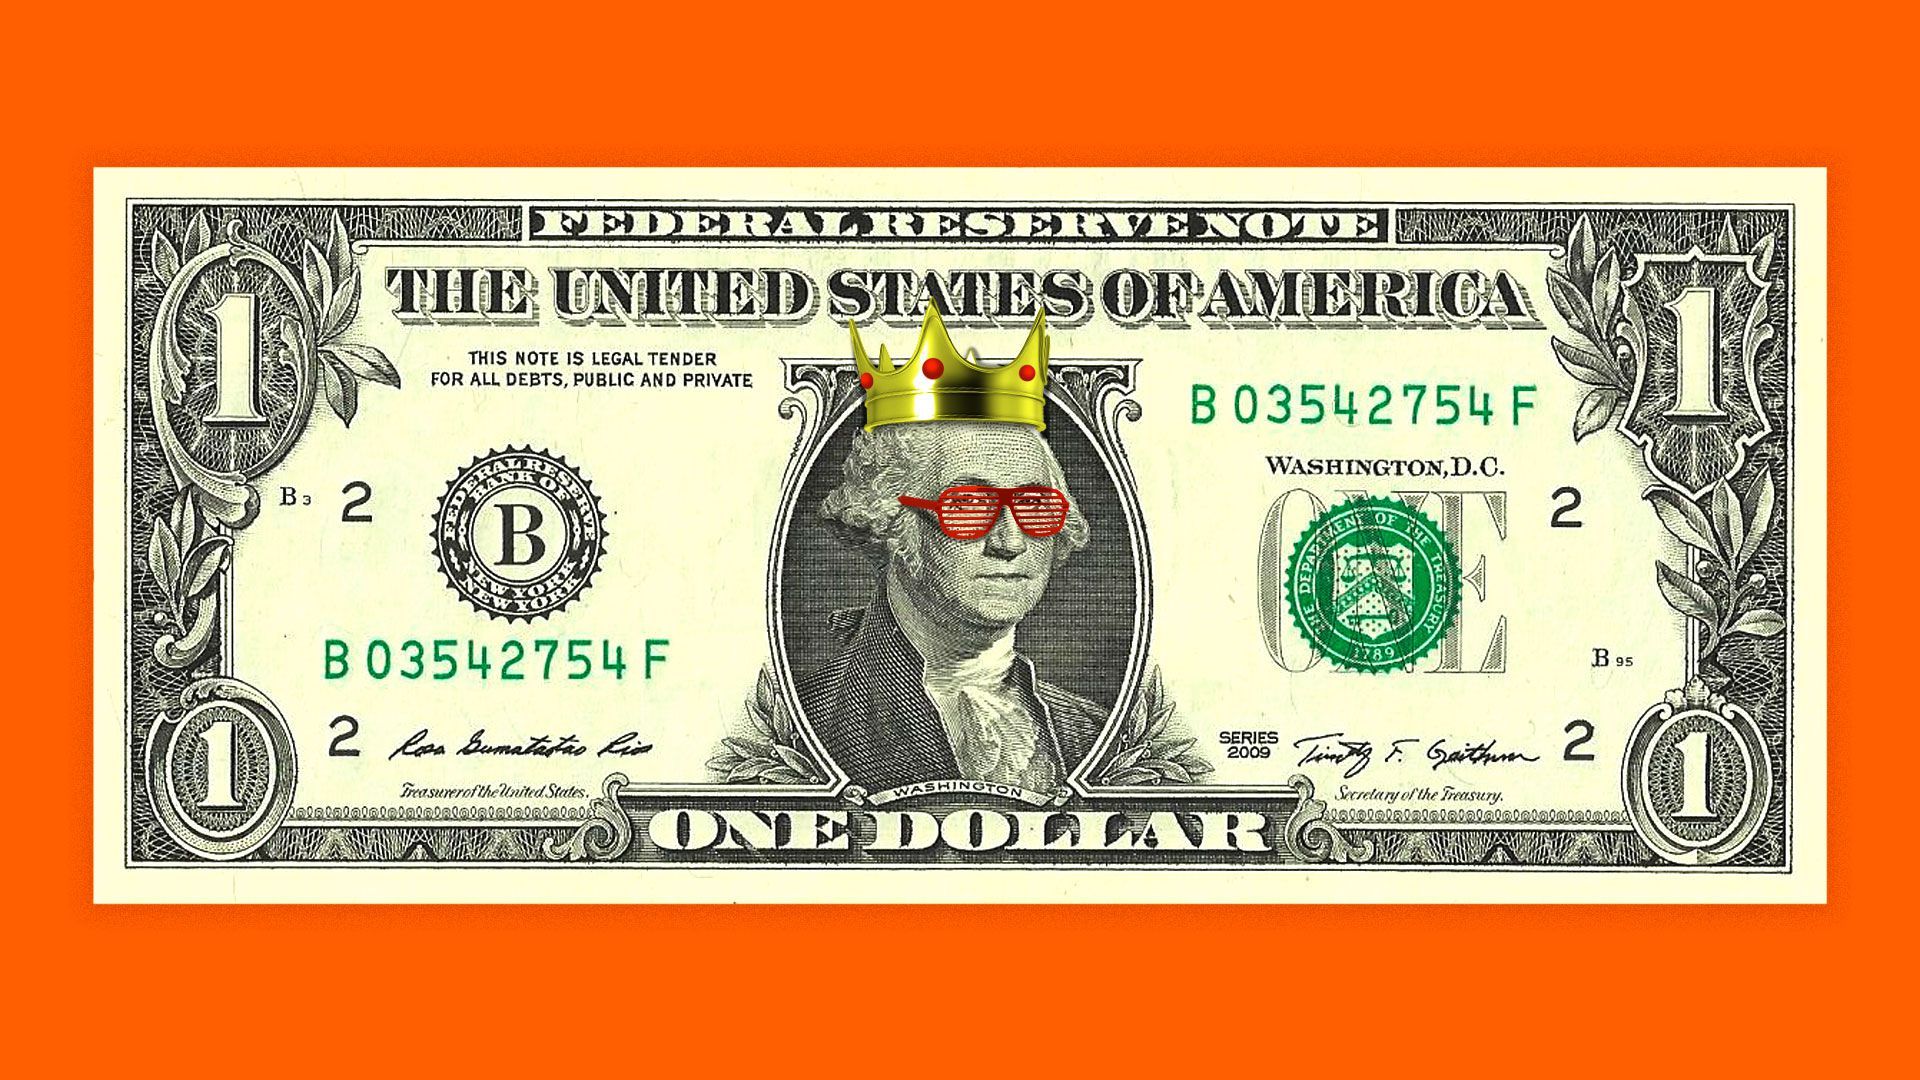 George Washington on the dollar bill wearing a crown and shutter shades